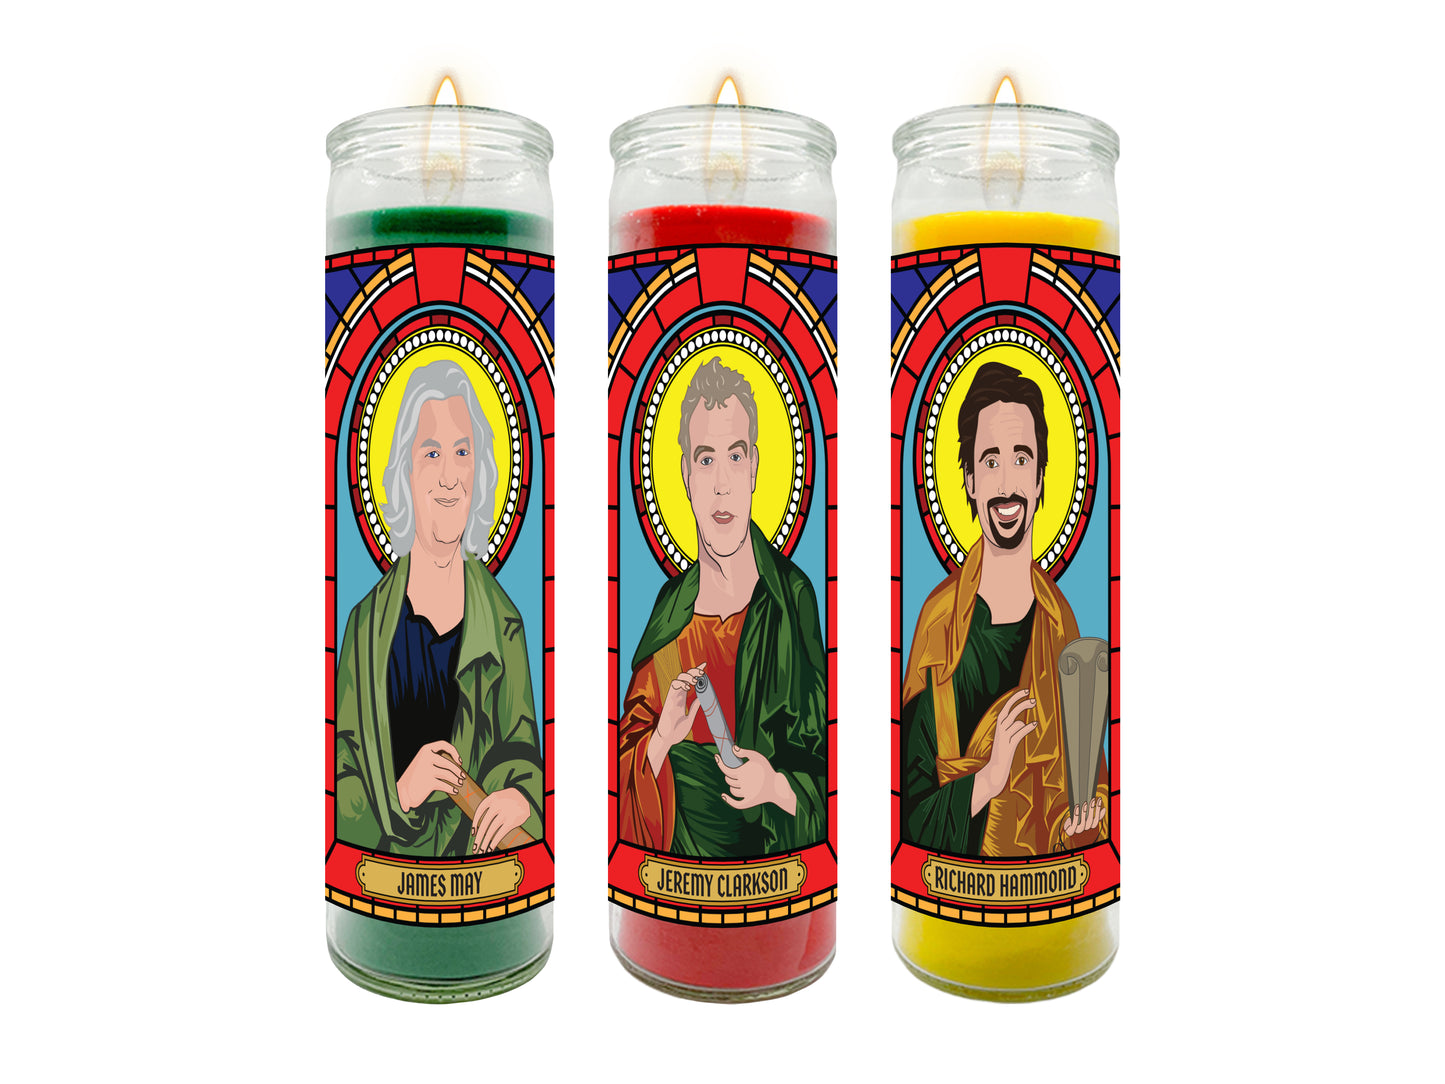 Top Gear / Grand Tour Illustrated Prayer Candle Series